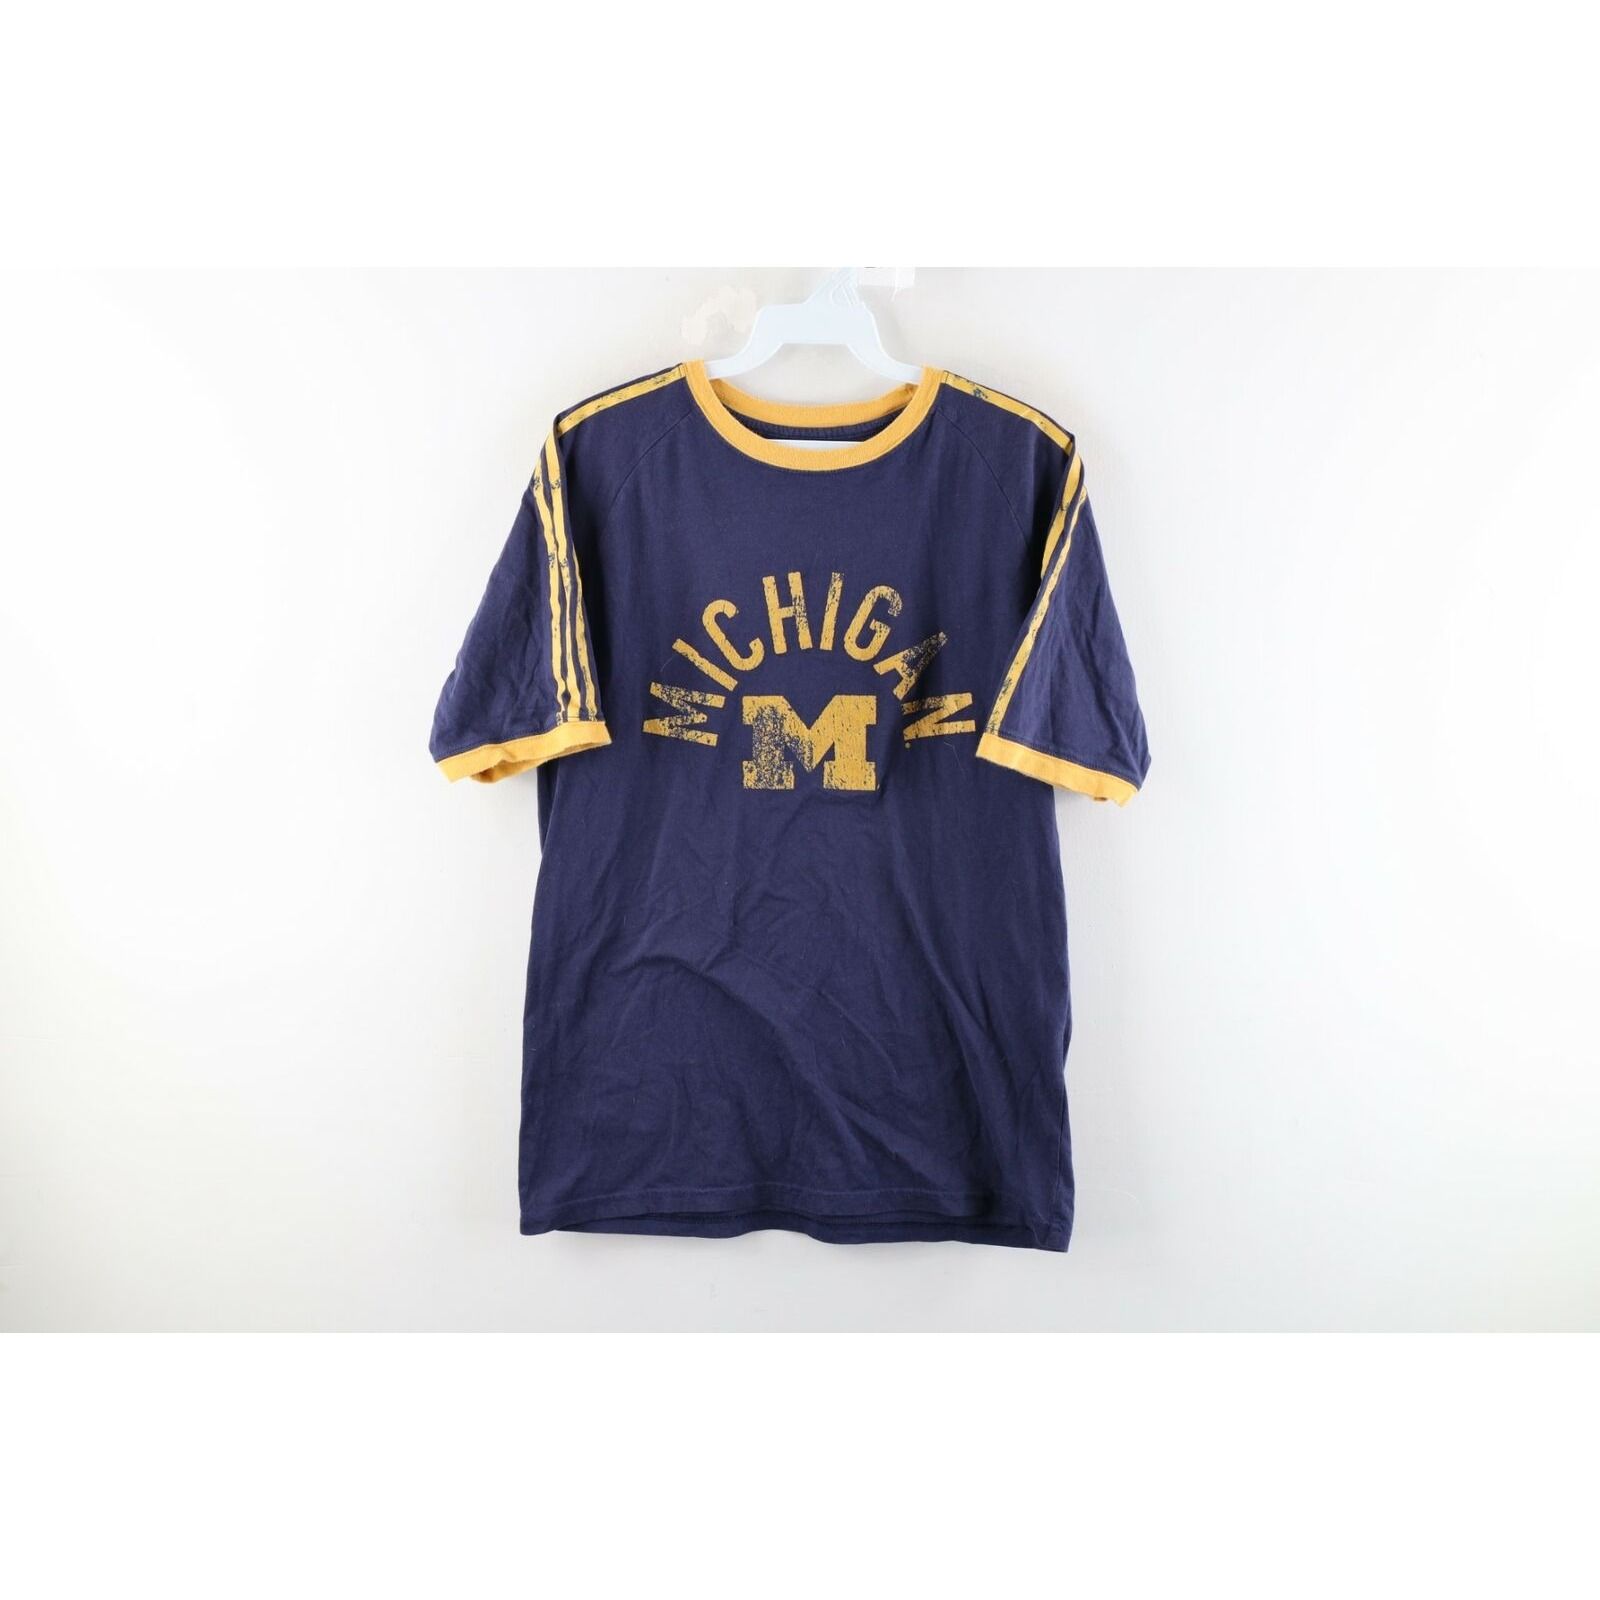 Adidas Adidas Retro University of Michigan Spell Out Ringer T-Shirt Size US S / EU 44-46 / 1 - 1 Preview